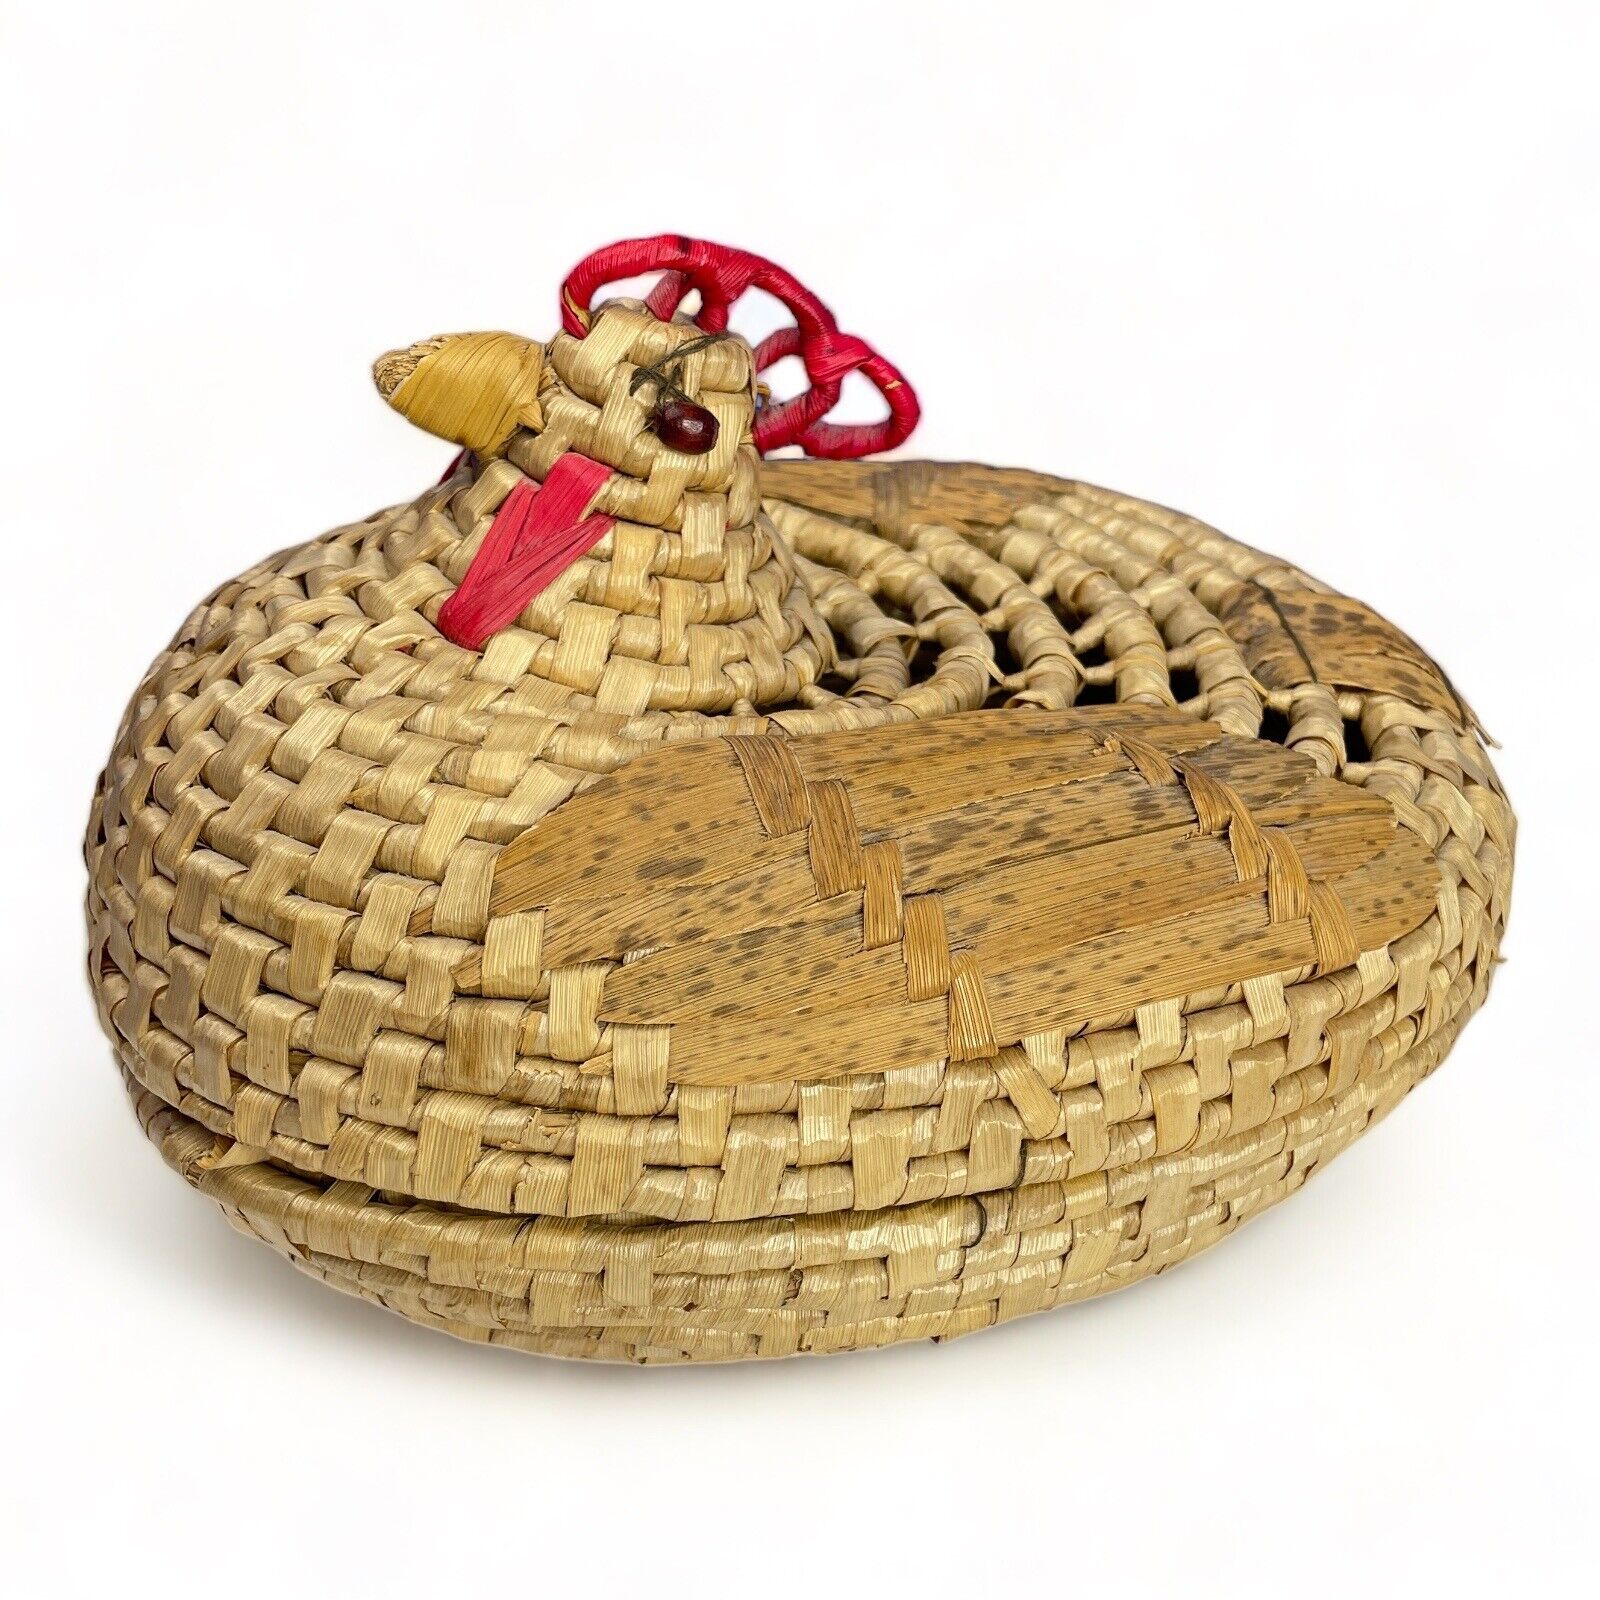 Rooster Bread Basket Wicker Rattan Chicken BoHo Country Chic 8 x 7 x 6